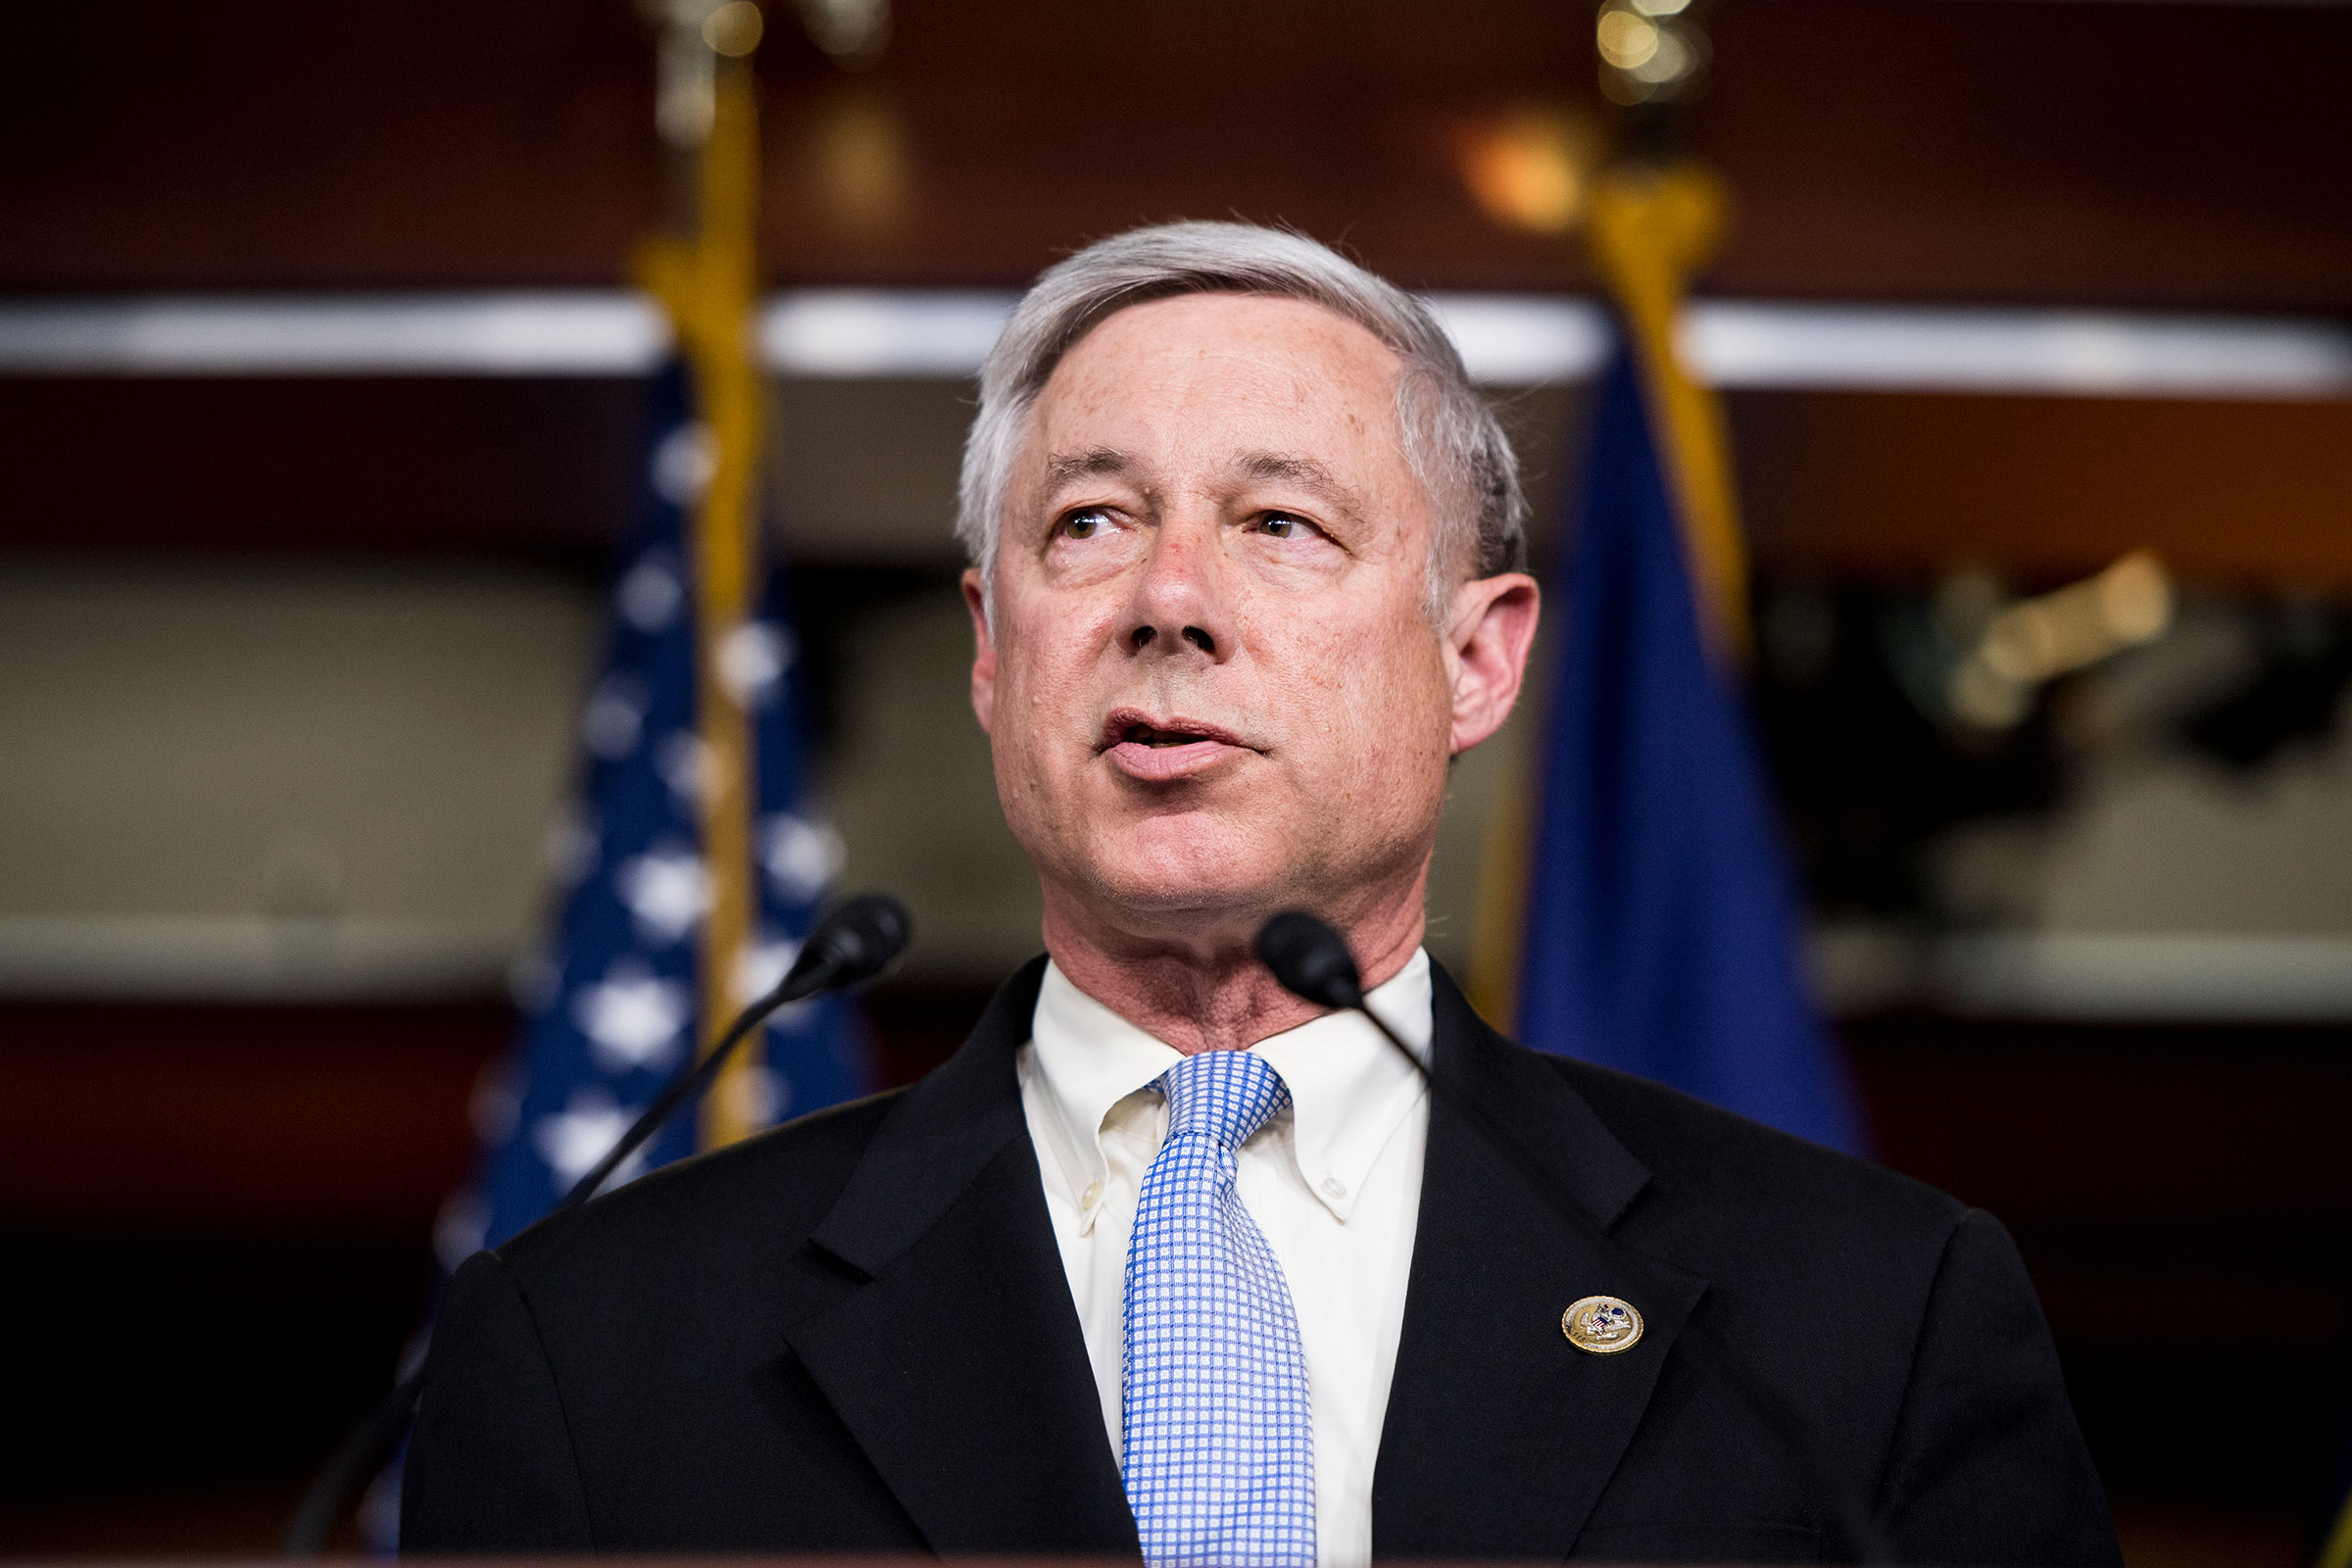 Rep. Fred Upton speaks during a news conference at the Capitol on May 9, 2018. (Bill Clark—CQ Roll Call/Getty Images)